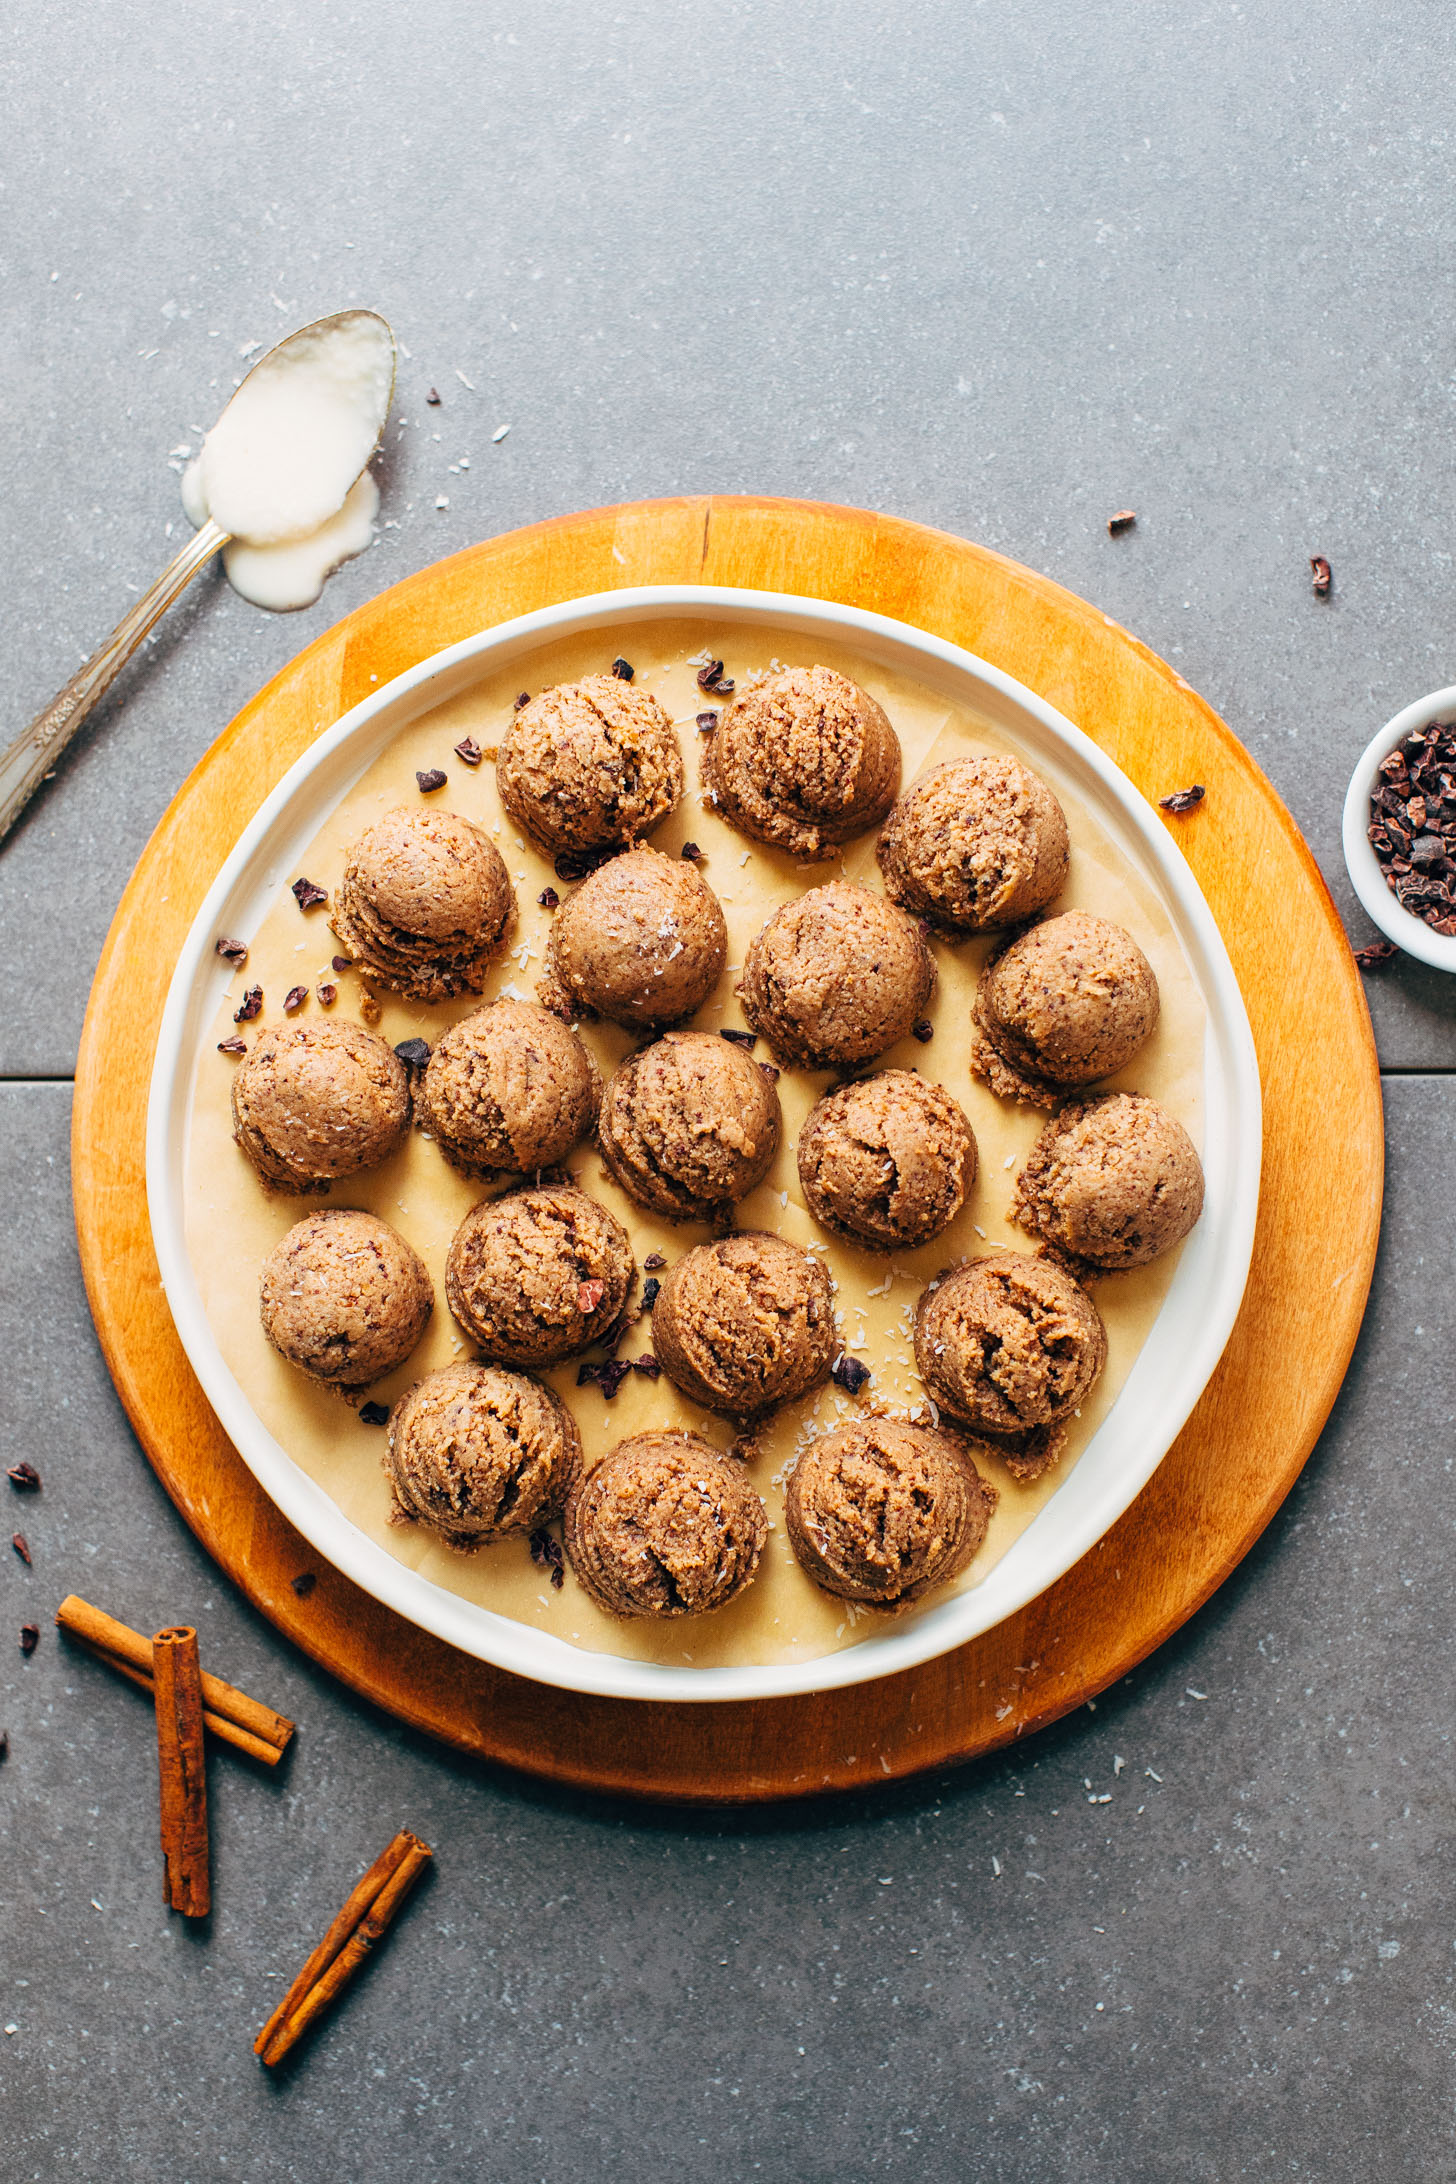 Plate full of delicious Coconut Cacao Tahini Snack Bites